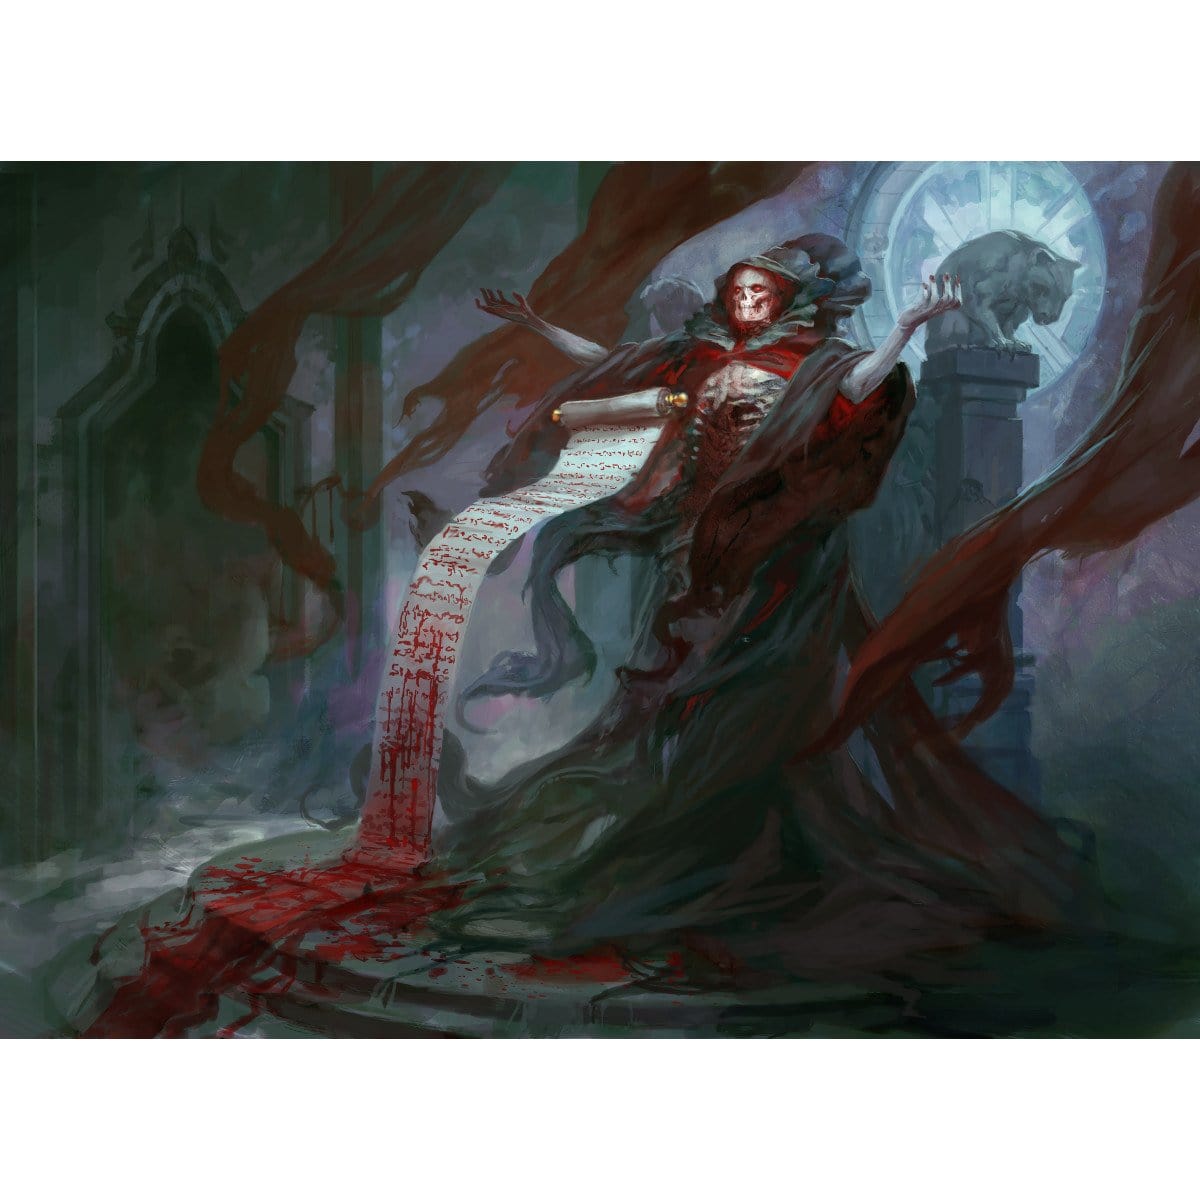 Blood Scrivener Print - Print - Original Magic Art - Accessories for Magic the Gathering and other card games